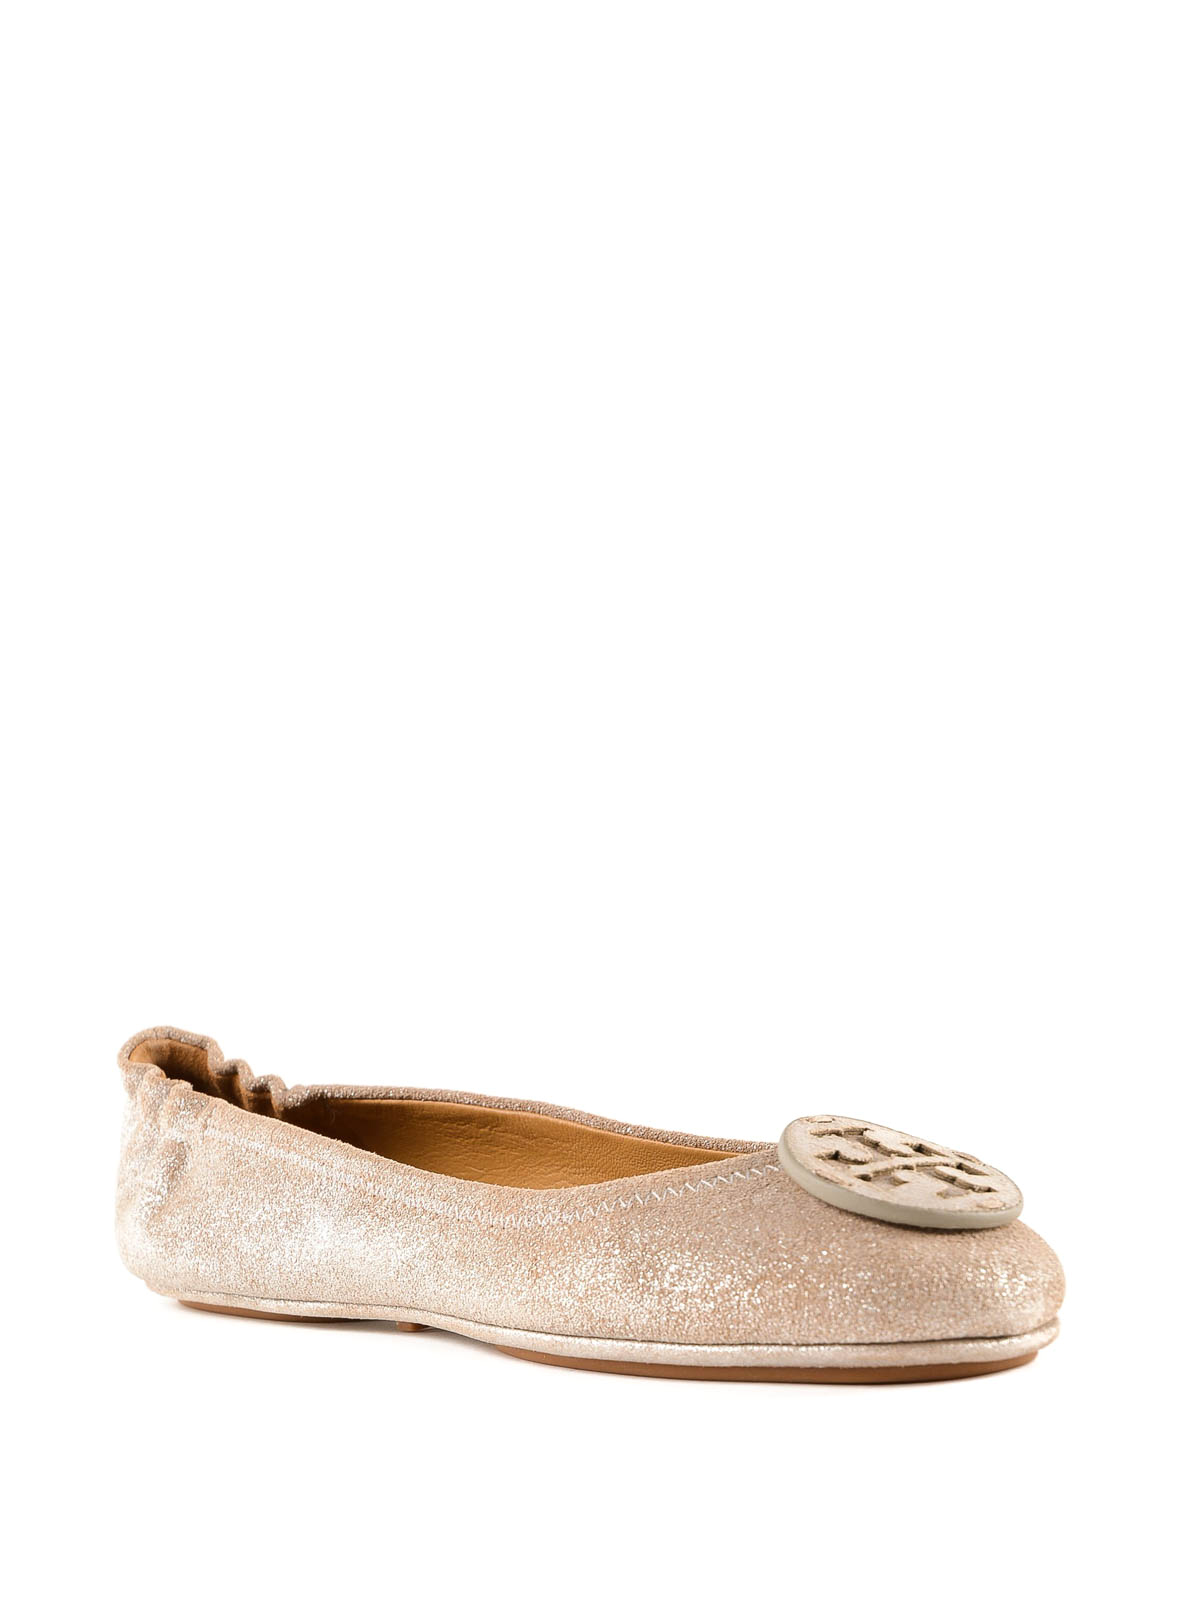 tory burch suede loafers